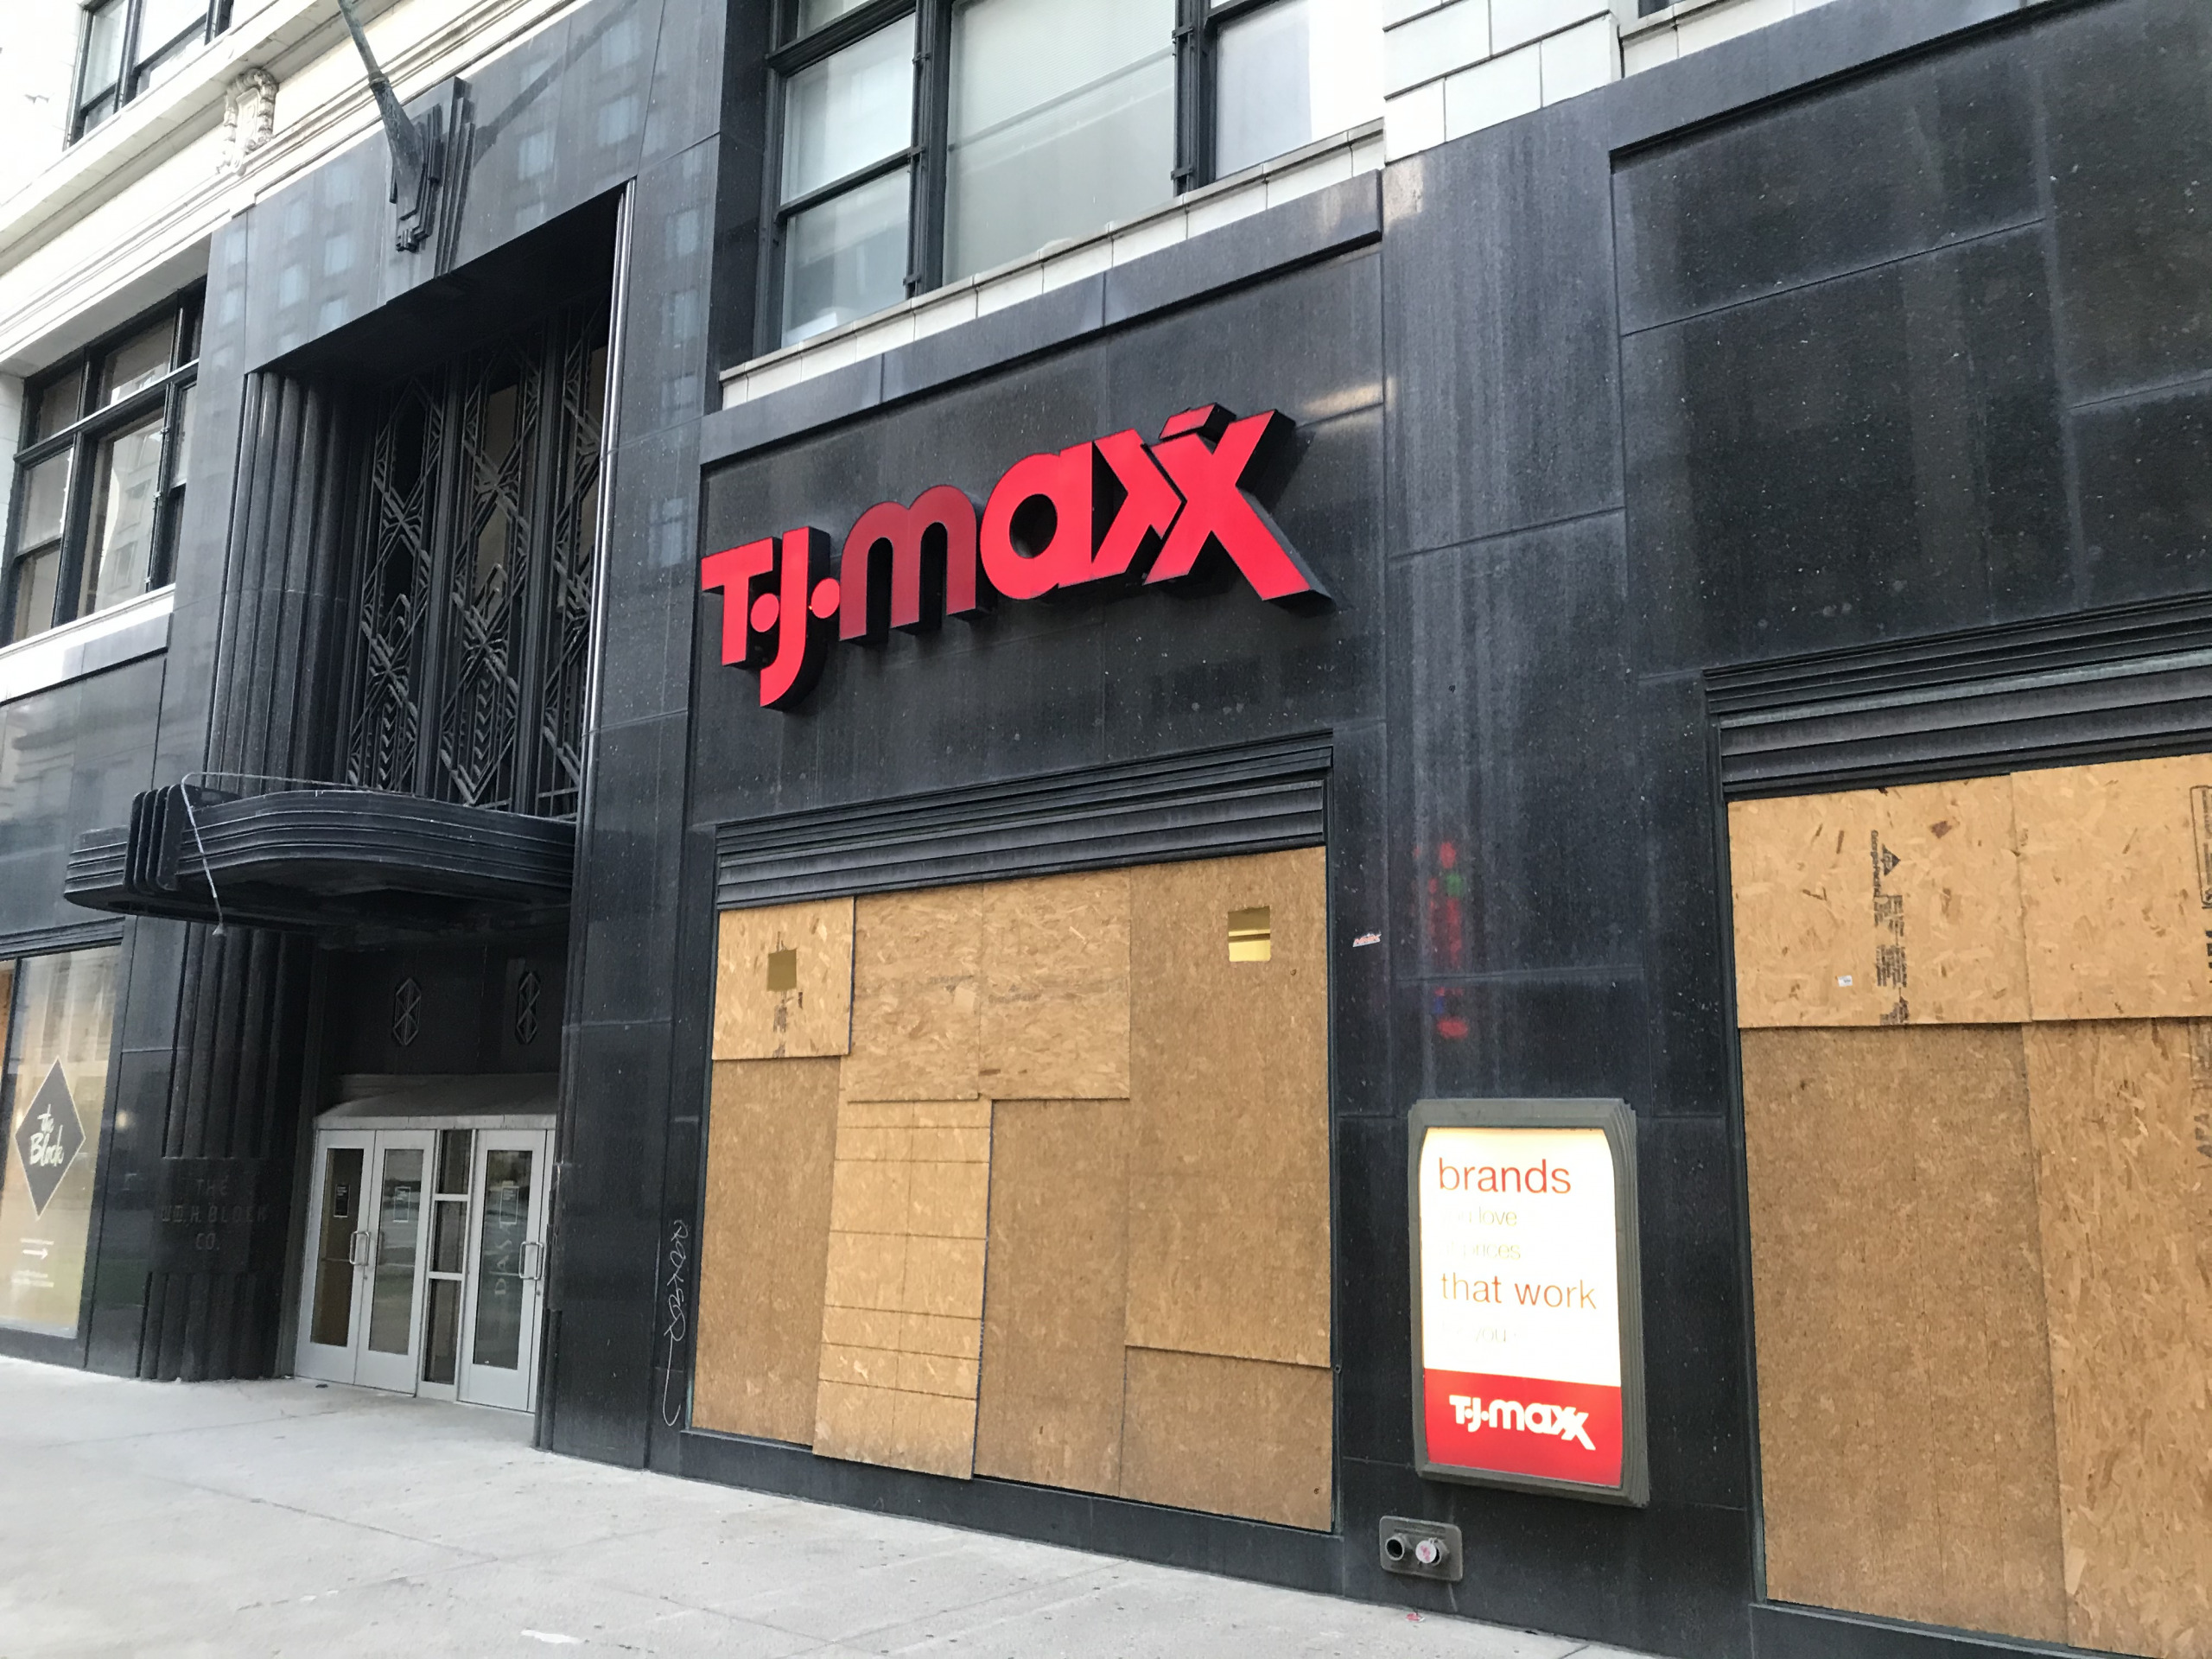 Reopening date for downtown T.J. Maxx store still uncertain